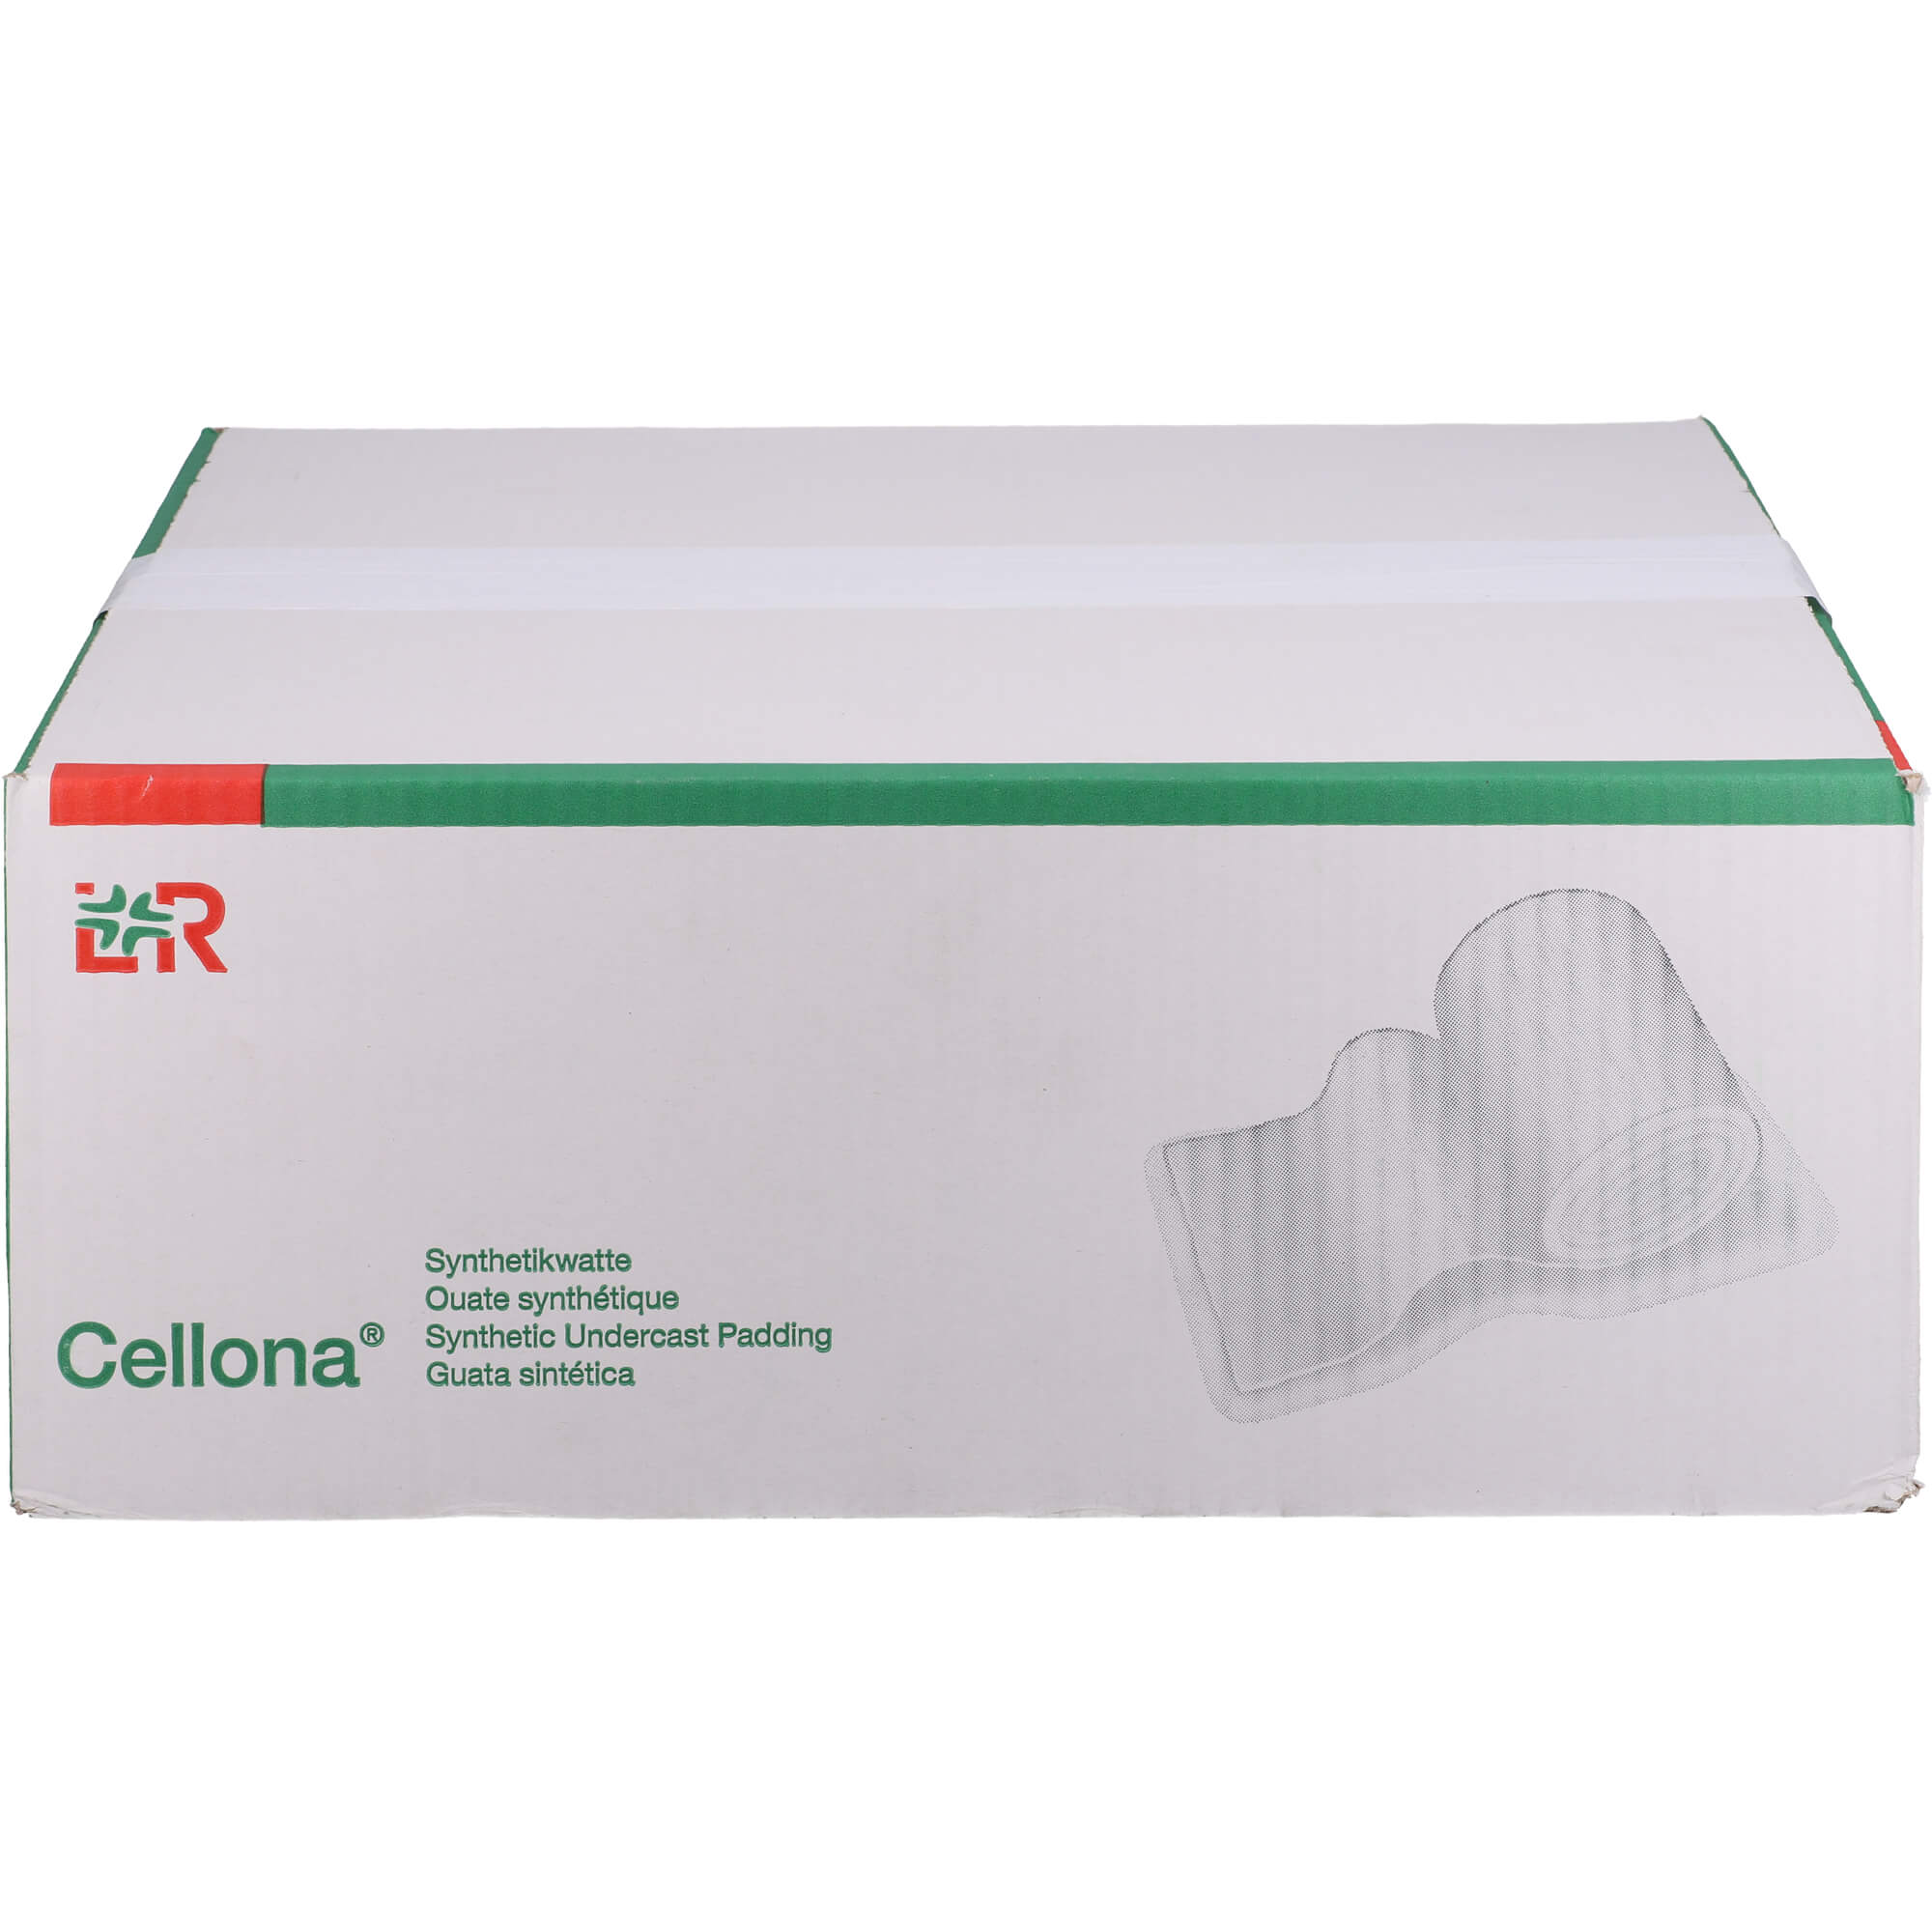 CELLONA Synthetikwatte 15 cmx3 m Rolle